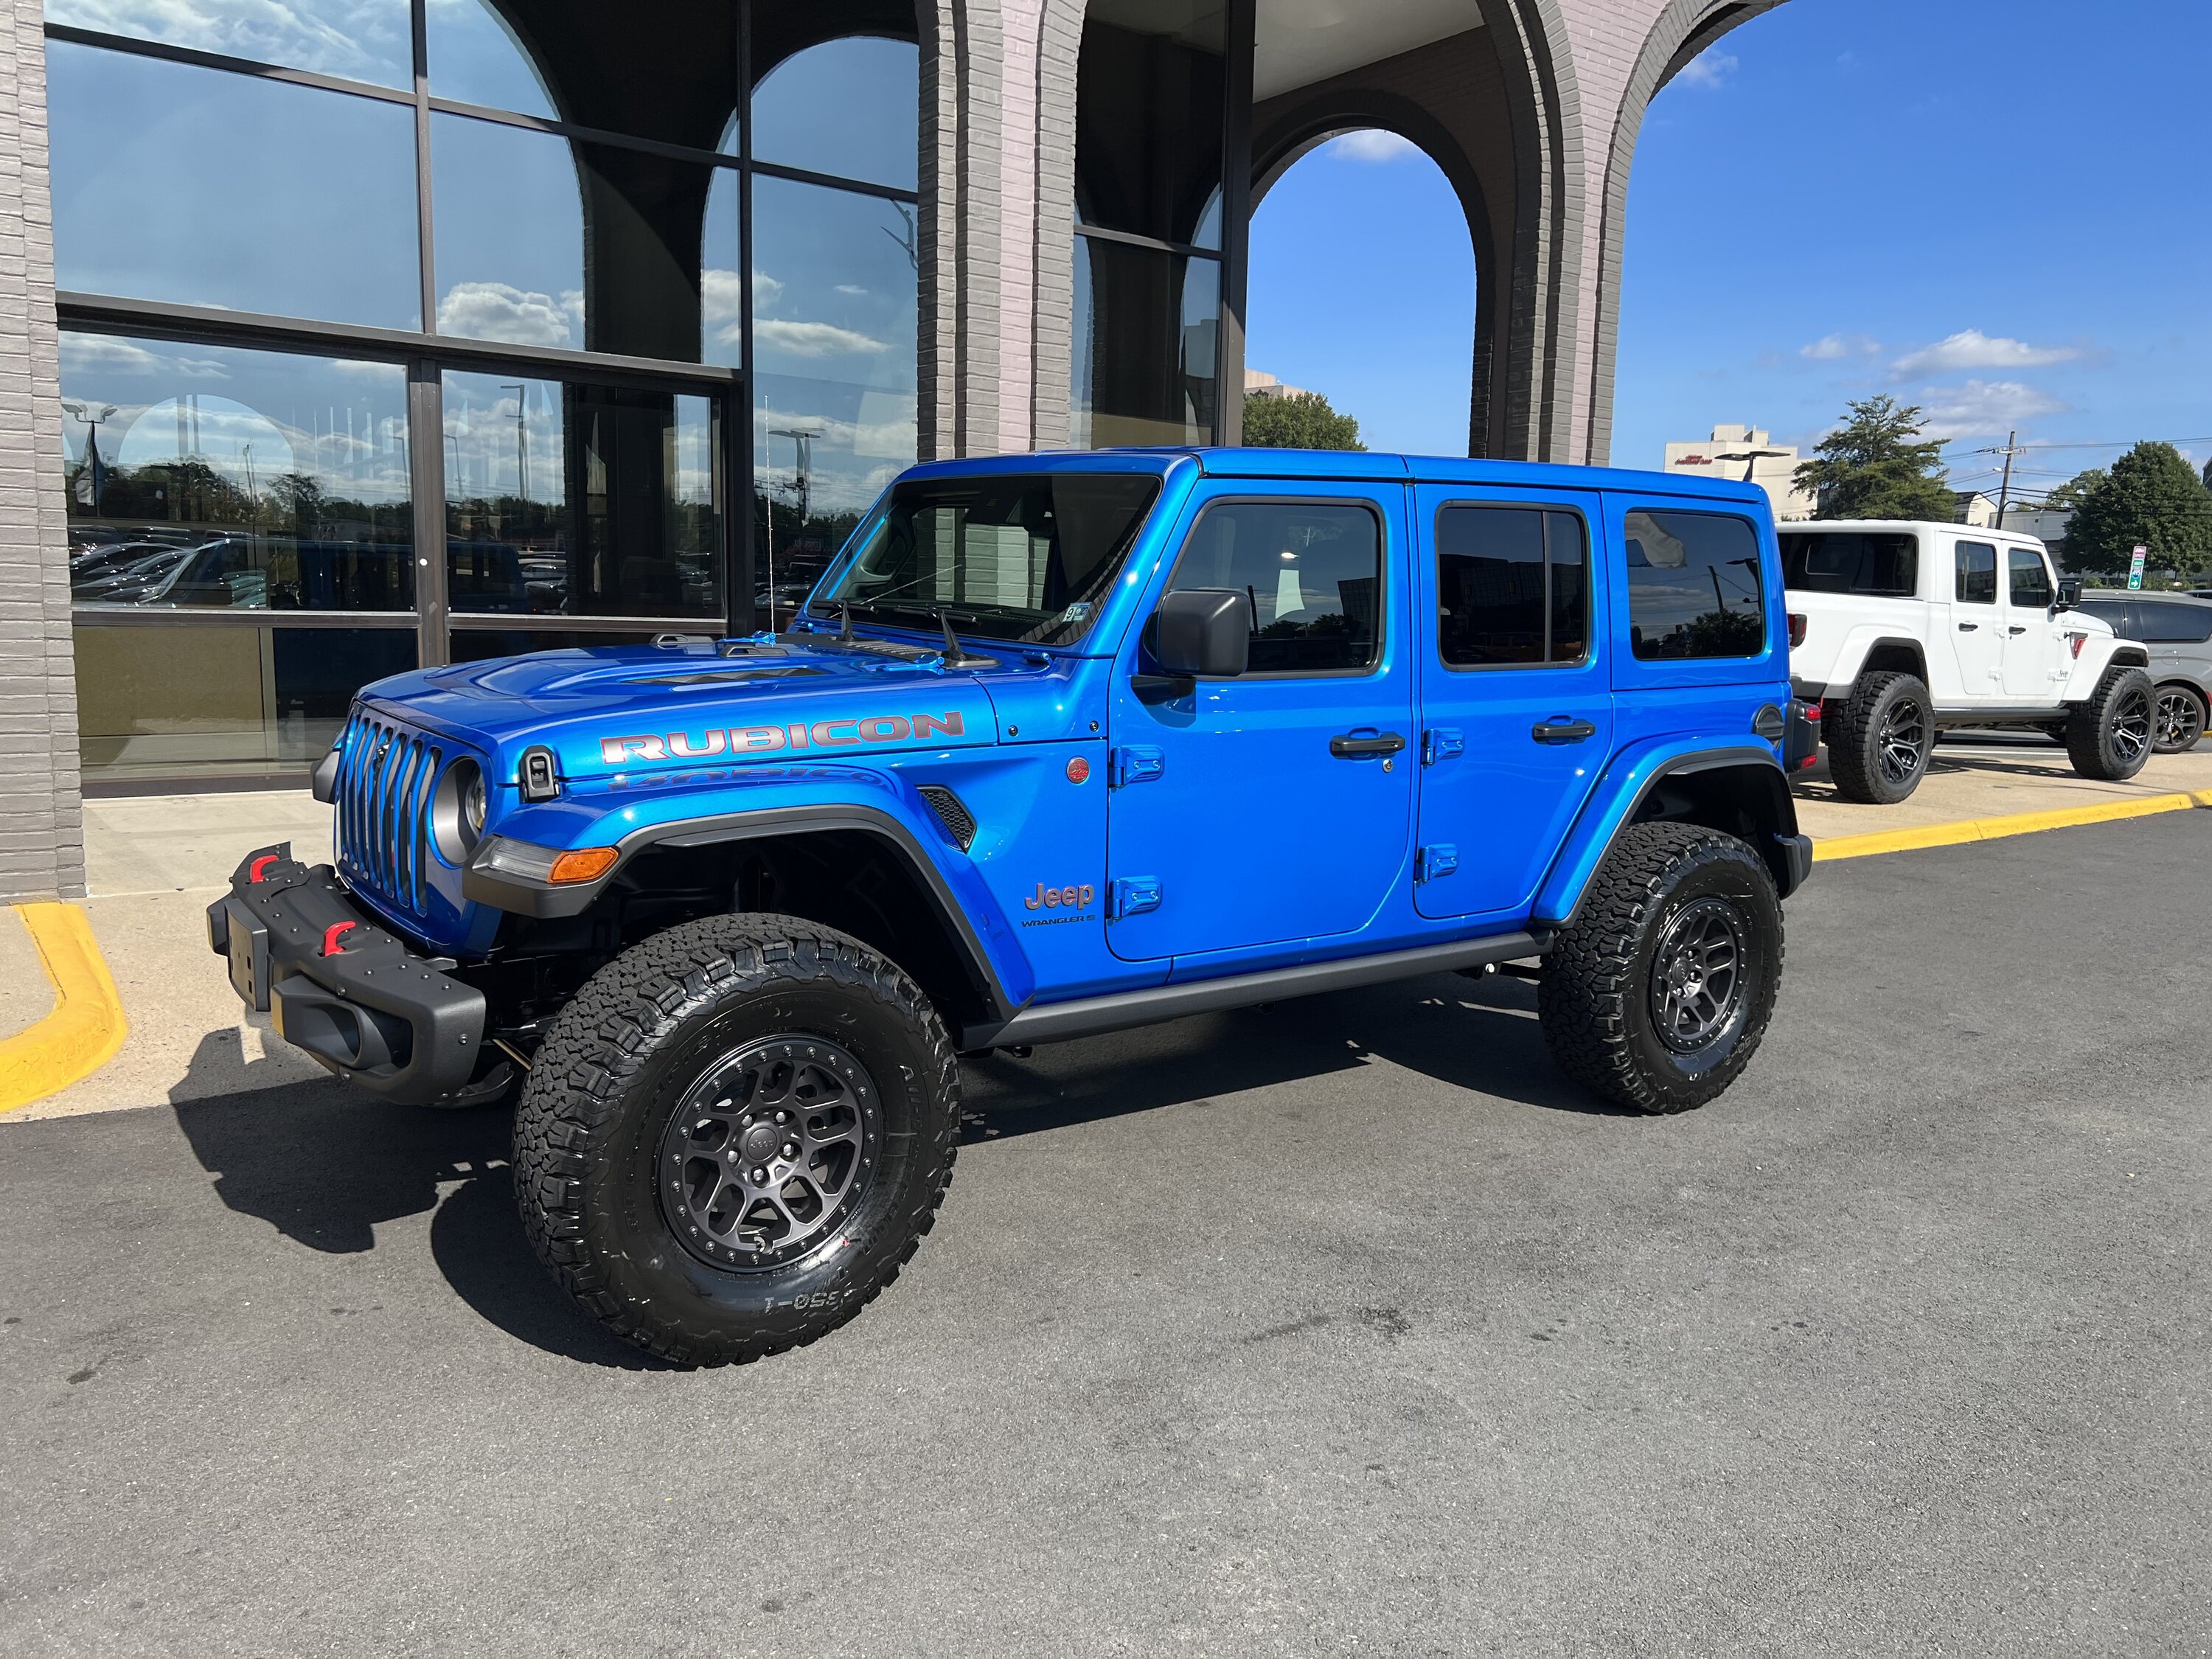 Jeep Wrangler JL Koons Roll Call and updates 2022 orders IMG_1915